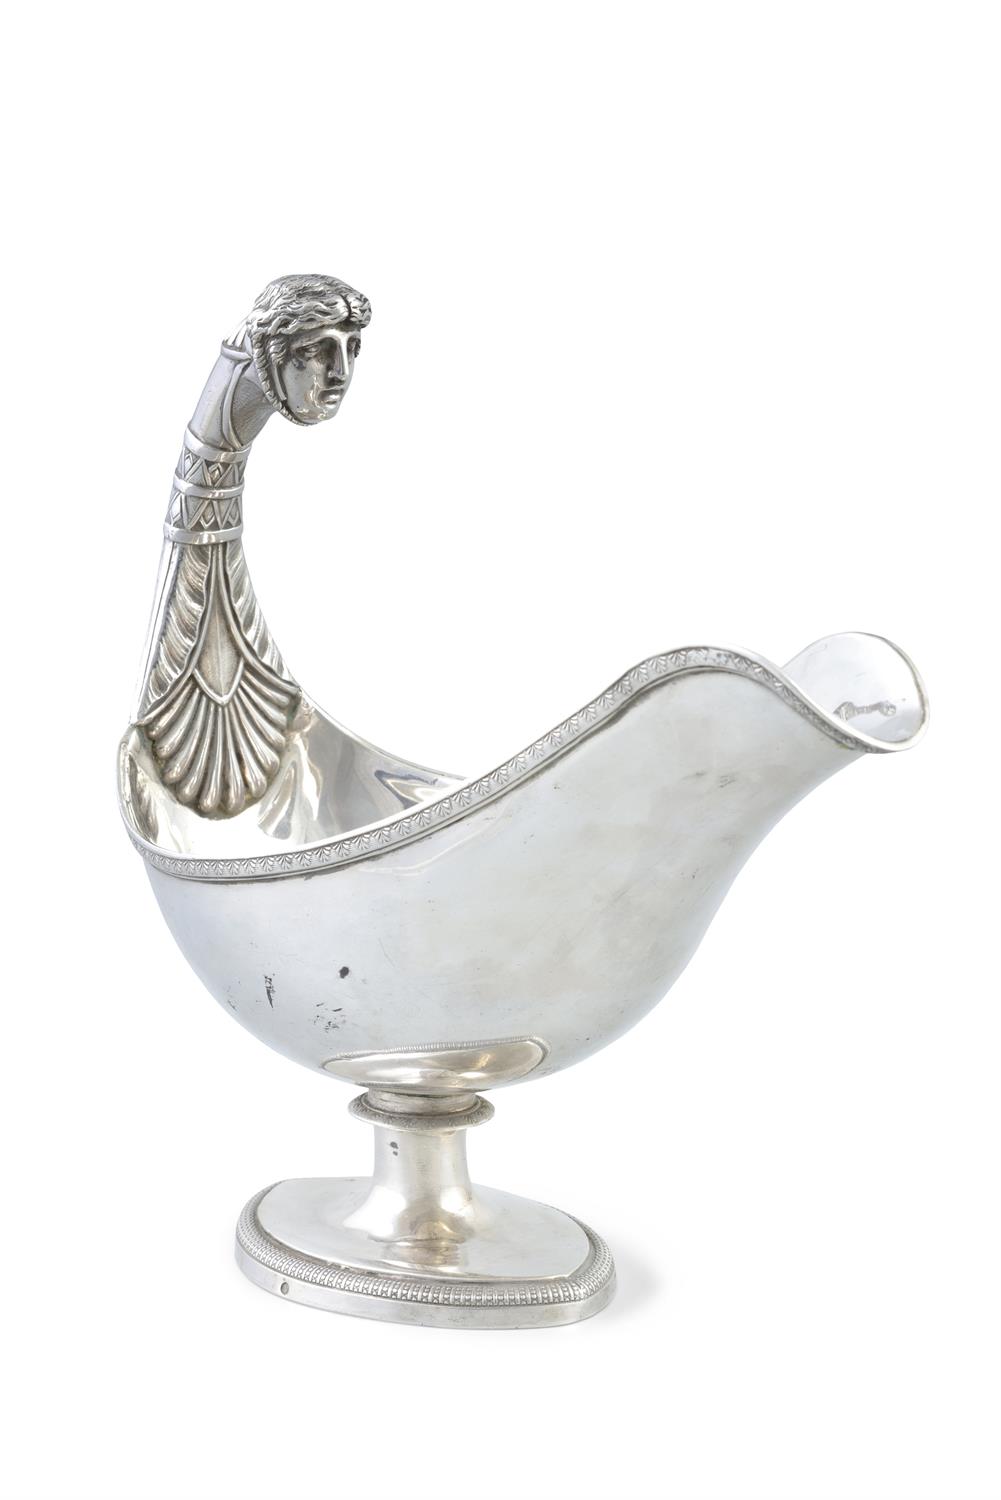 A NEO-CLASSICAL FRENCH SILVER SAUCE BOAT, Paris c.1800, Directoire Period, the flying